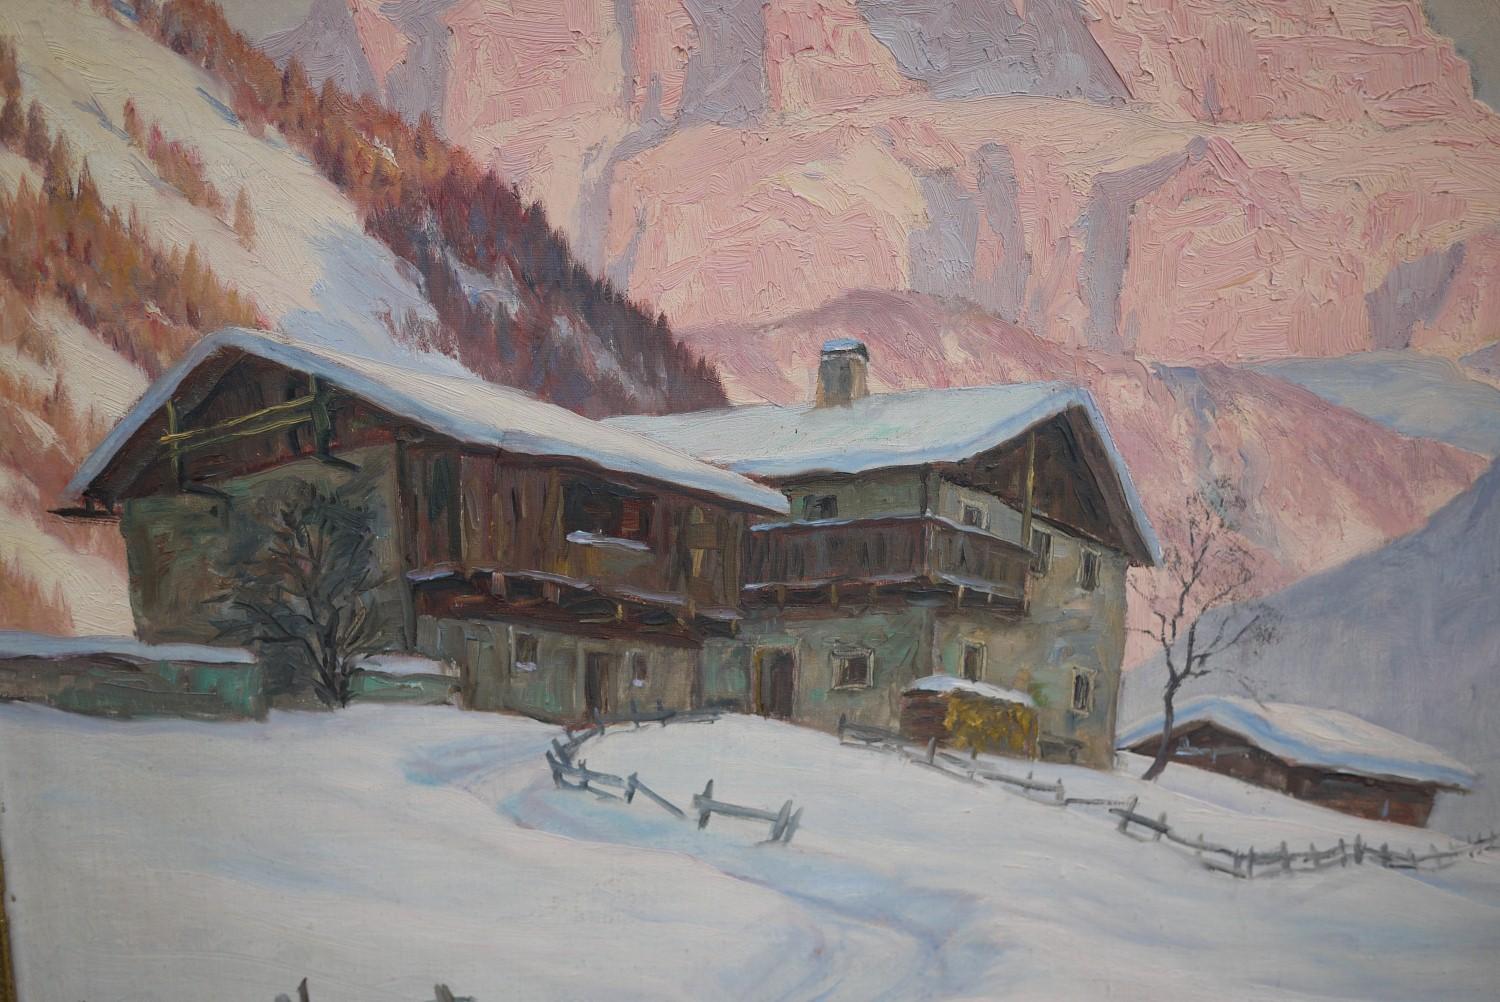 Sassolungo - Sella Group
70 cm x 110 cm (without frame) - oil on board 
27.6 in x 43.3 in (without frame)

Erwin Kettemann portrays the Sella Group and the Sassolungo painting 